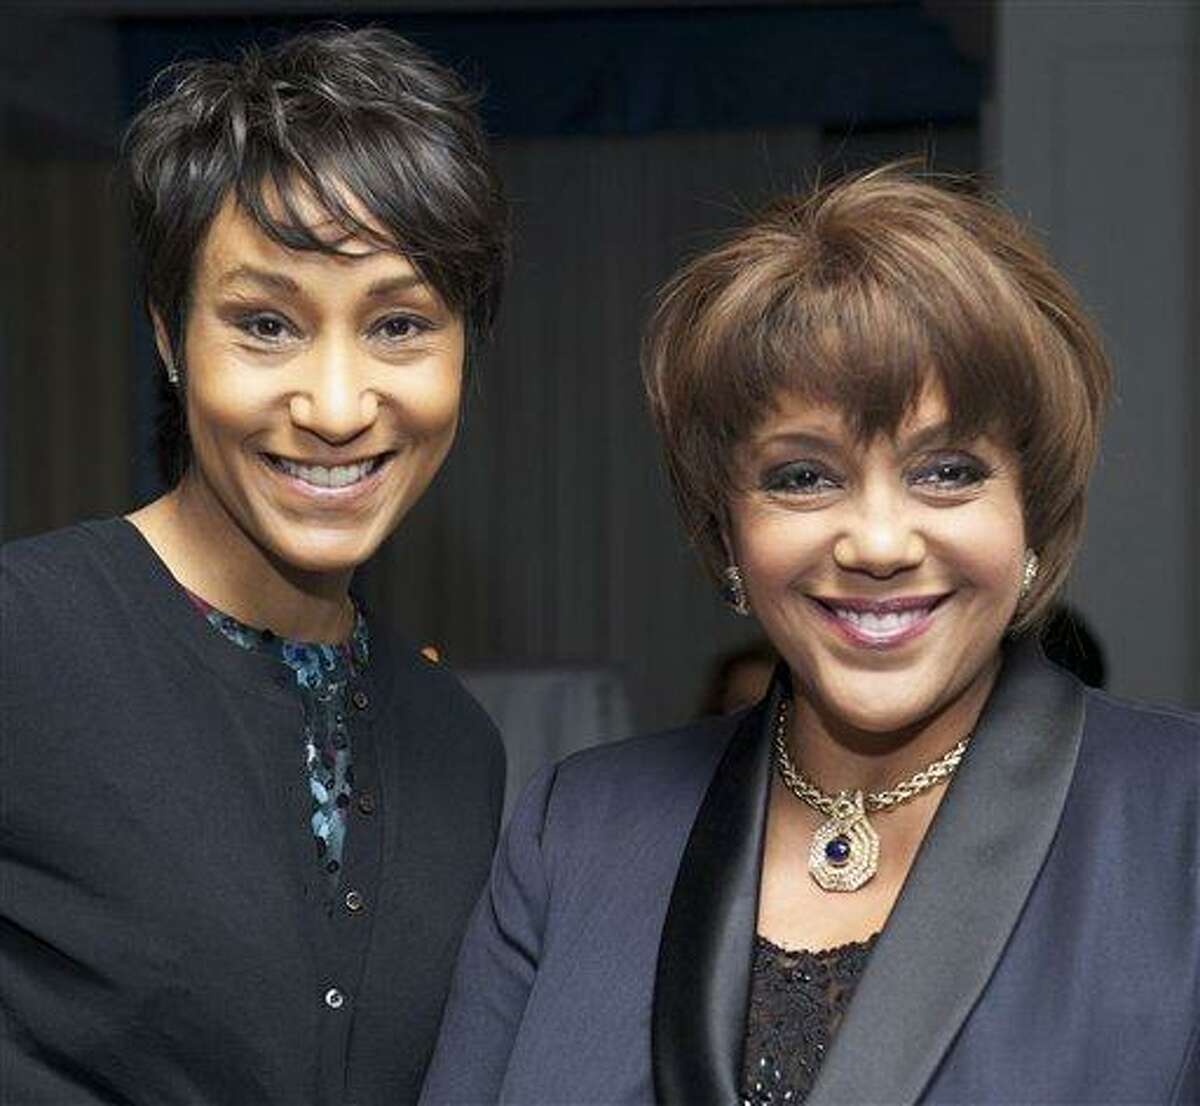 FILE - In this file photo taken March 4, 2010 in New York, former White House Social Secretary Desiree Rogers, left, poses with Johnson Publishing Inc. CEO Linda Johnson Rice as they attend UNCF 66th Anniversary dinner. Rice named Rogers the chief executive officer at Johnson Publishing Tuesday, Aug. 10, 2010, citing her confidence and business savvy. The Chicago-based company publishes Ebony and Jet magazines. (AP Photo/Earl Gibson III, File)